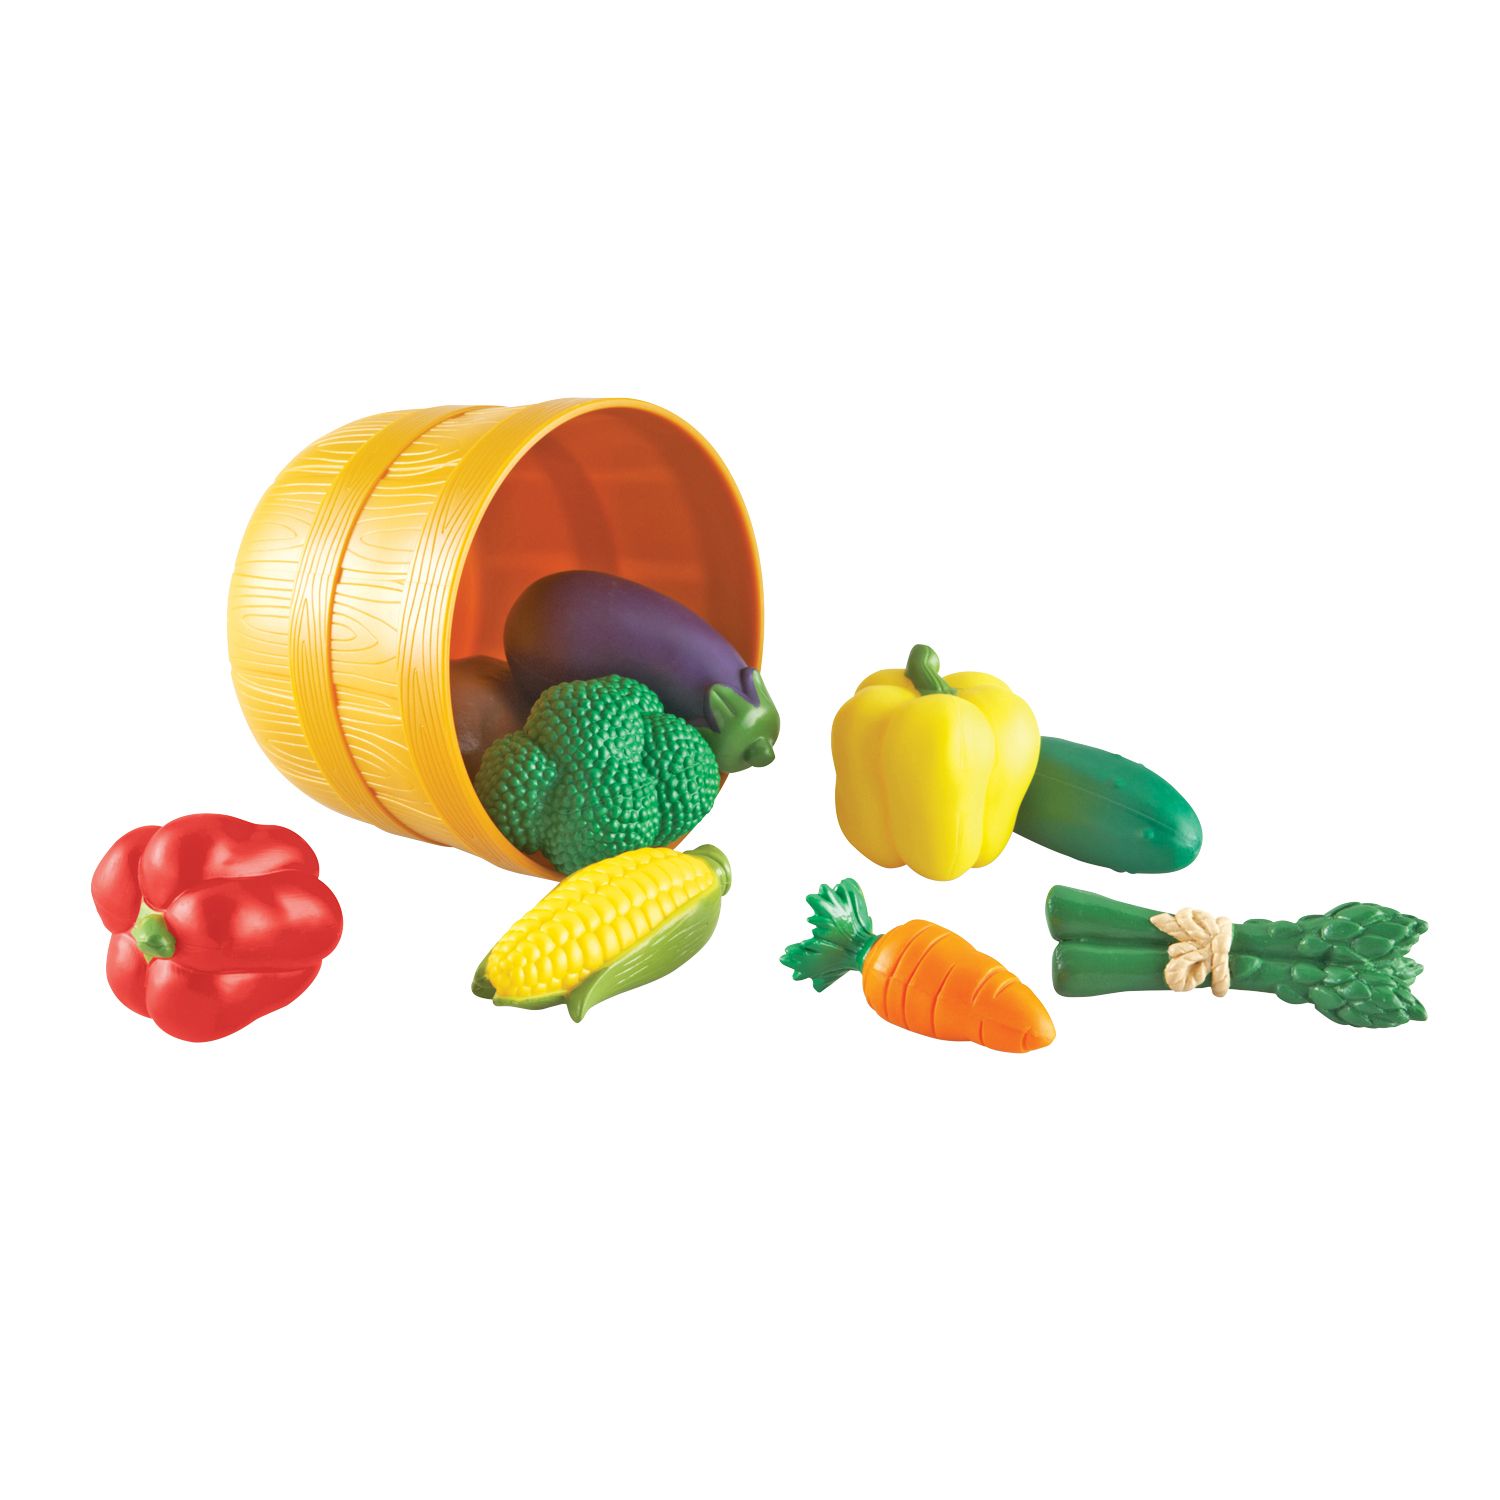 Image for Learning Resources New Sprouts Bushel of Veggies Set at Kohl's.